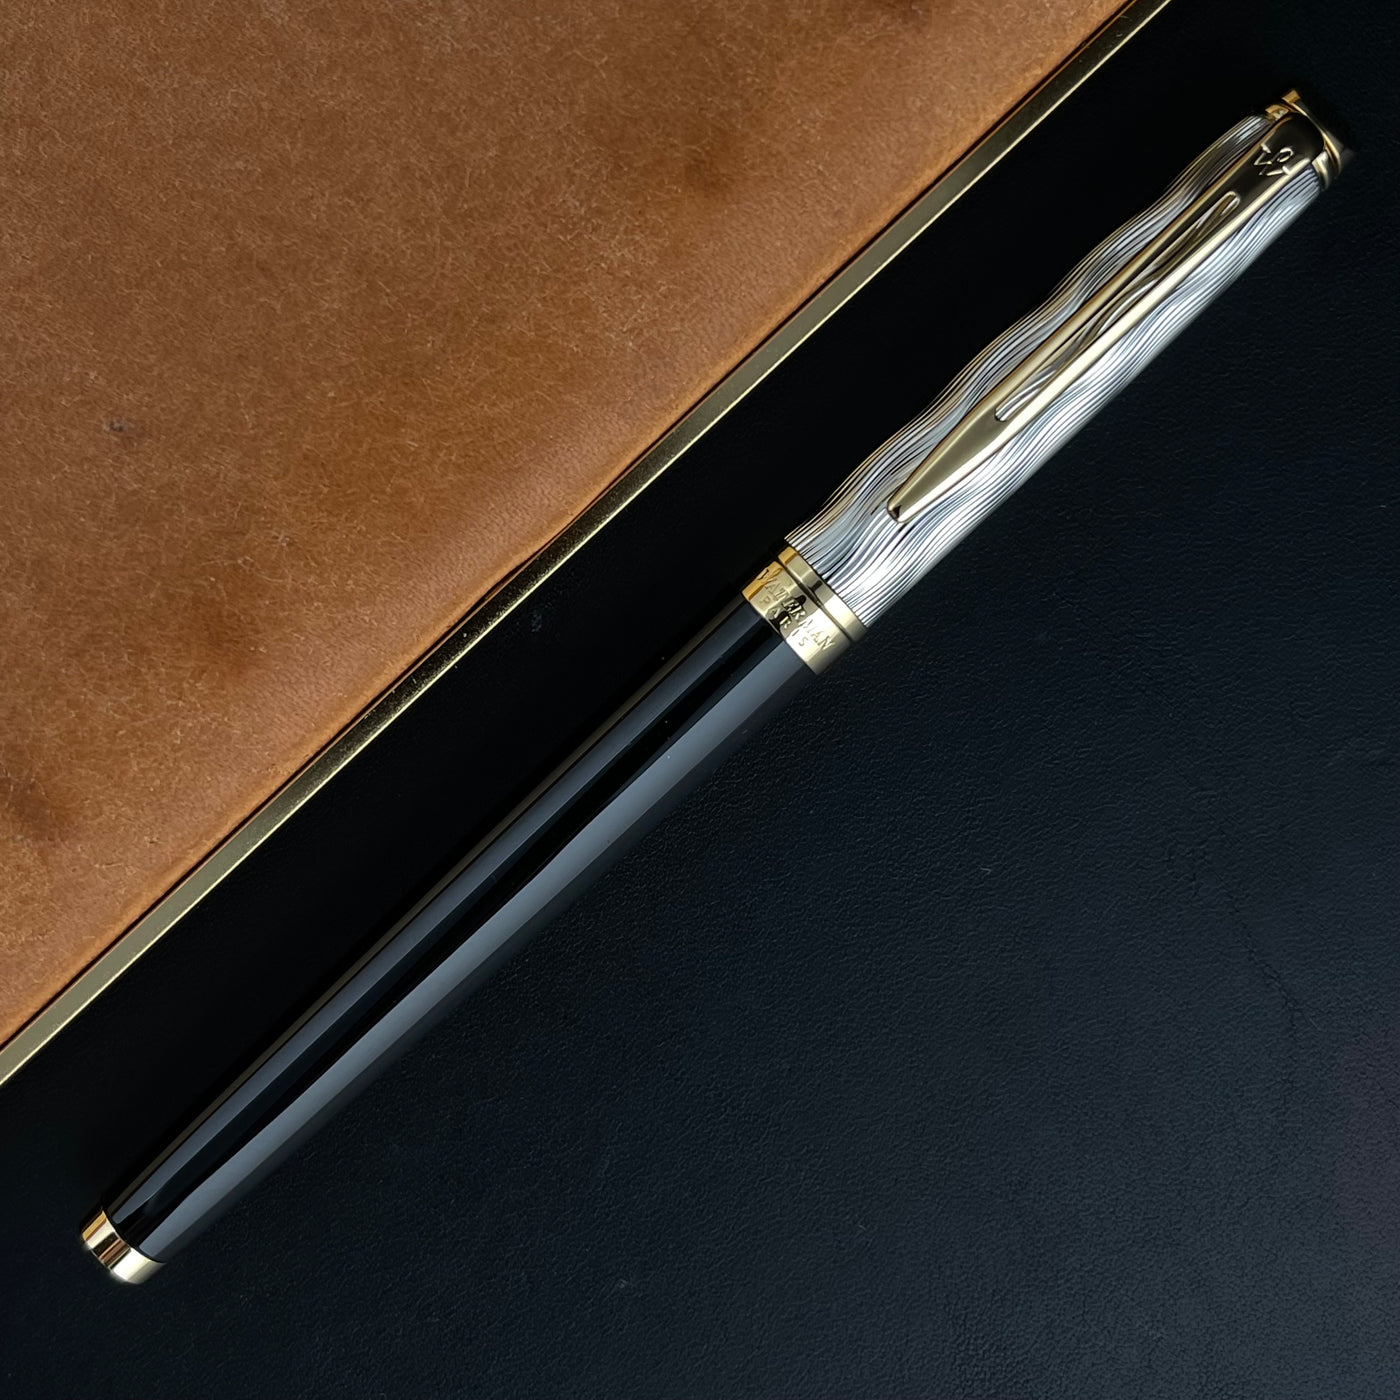 Waterman Hemisphere Rollerball Pen - Reflections of Paris (Special Edition)